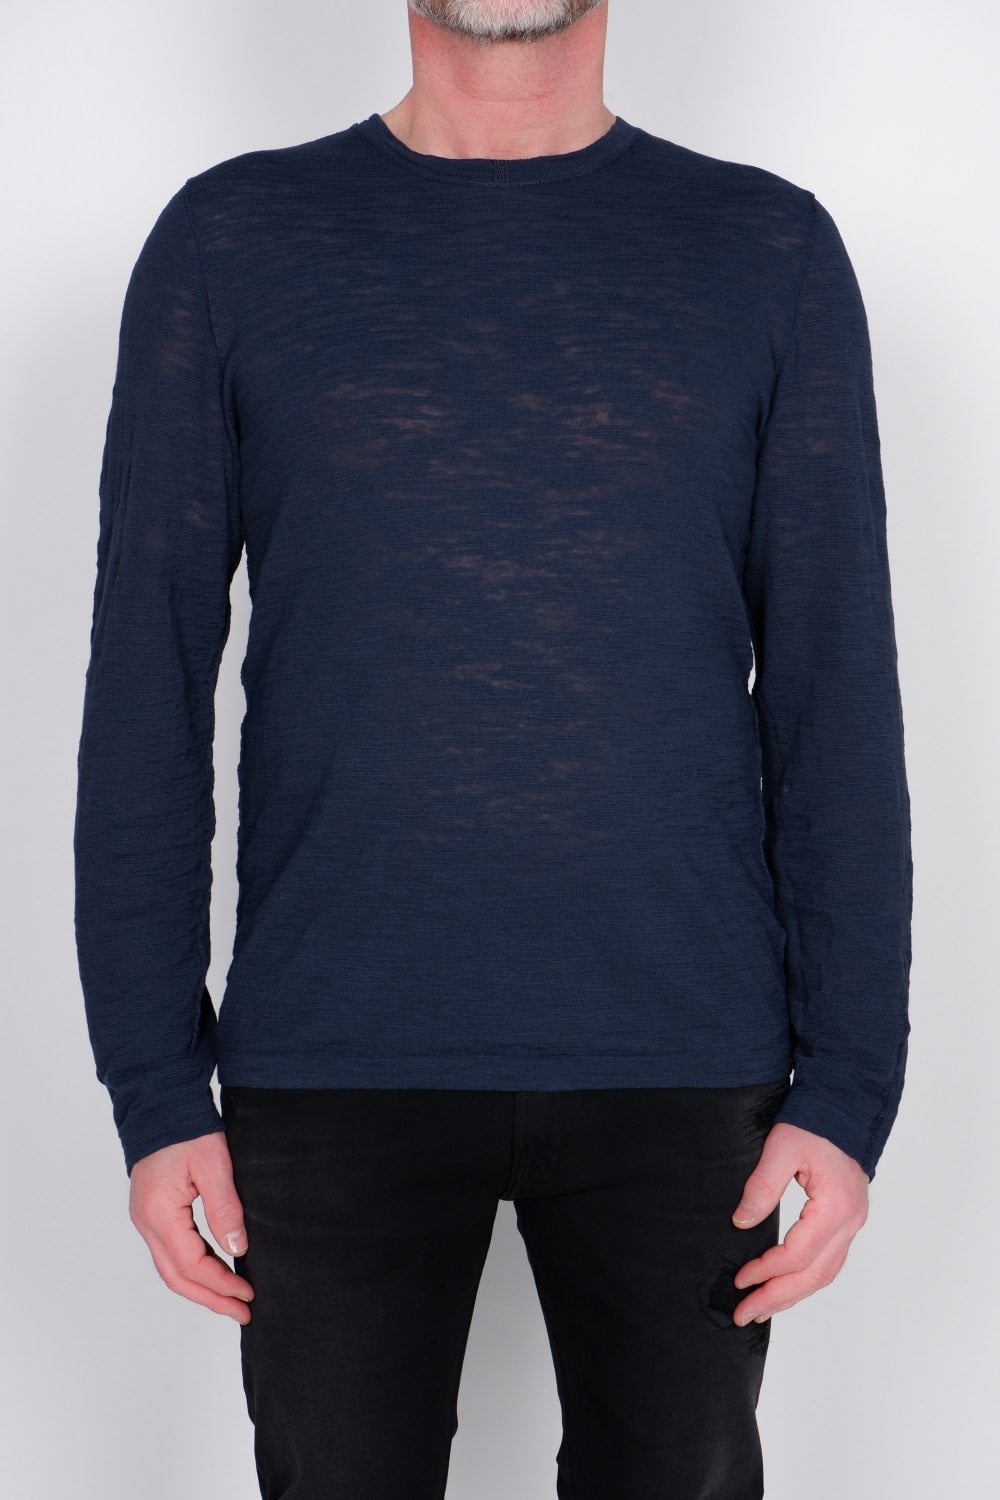 Buy the Transit Cotton/Linen L/S T-Shirt Navy at Intro. Spend £50 for free UK delivery. Official stockists. We ship worldwide.